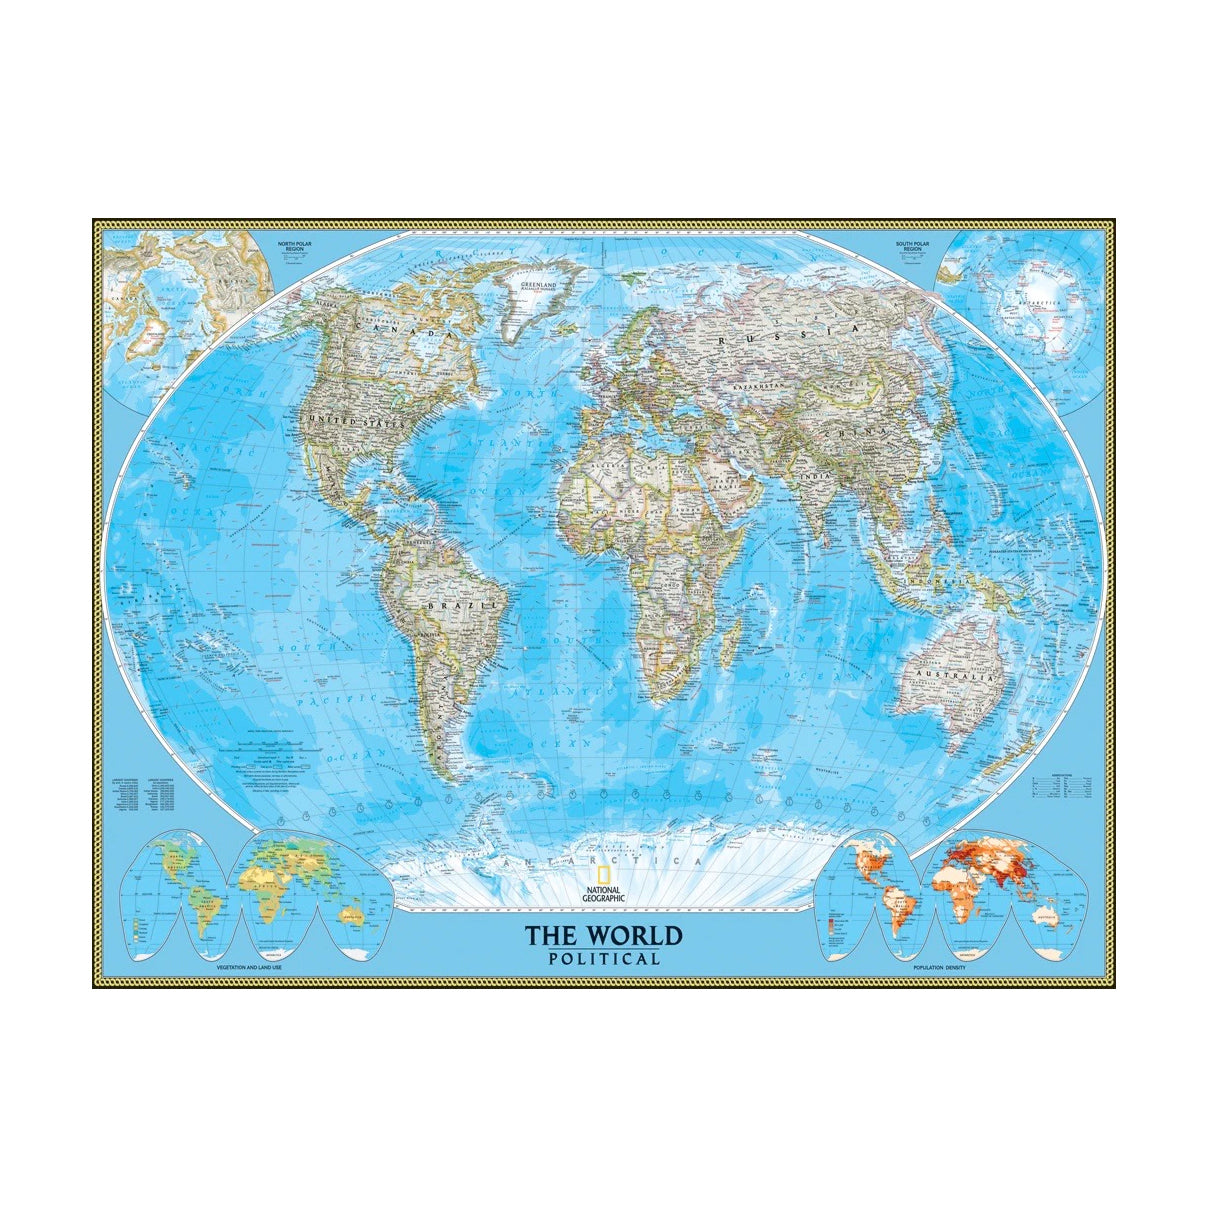 Puzzel National Gepographic│the world 1000 pcs│New York Puzzle Company│art. NPZNG1601│afbeelding puzzel